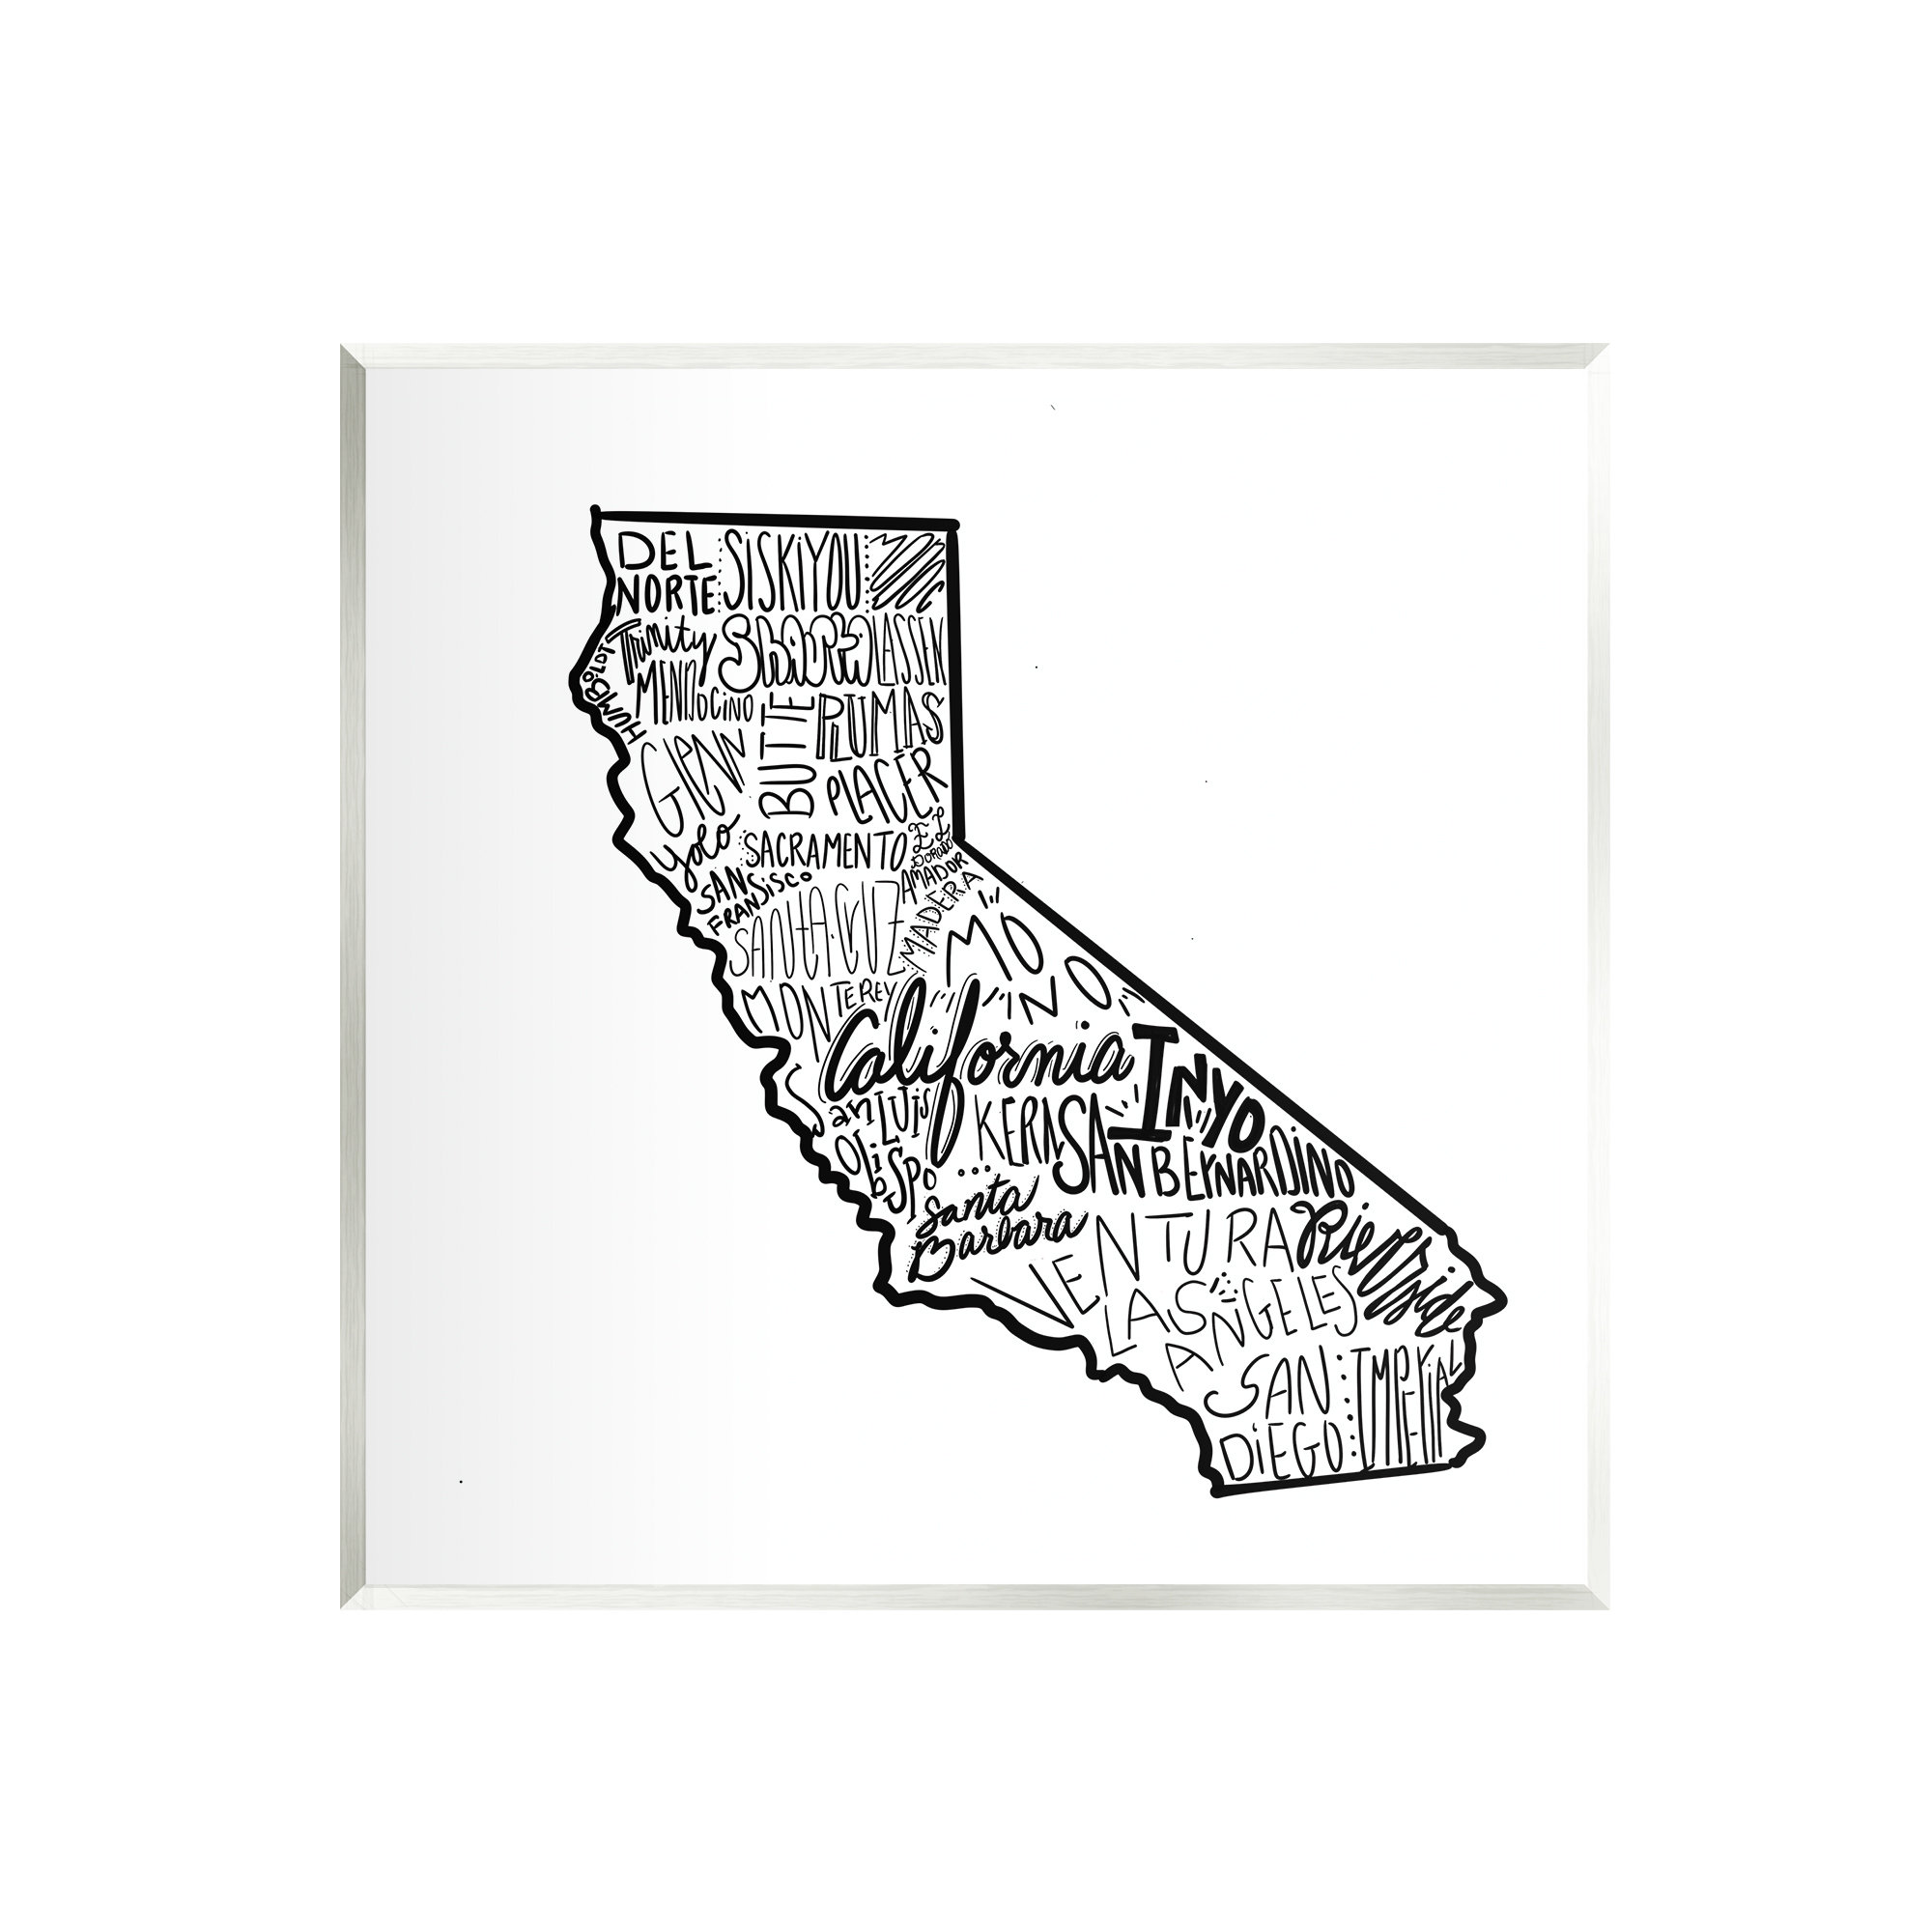 no california map with cities